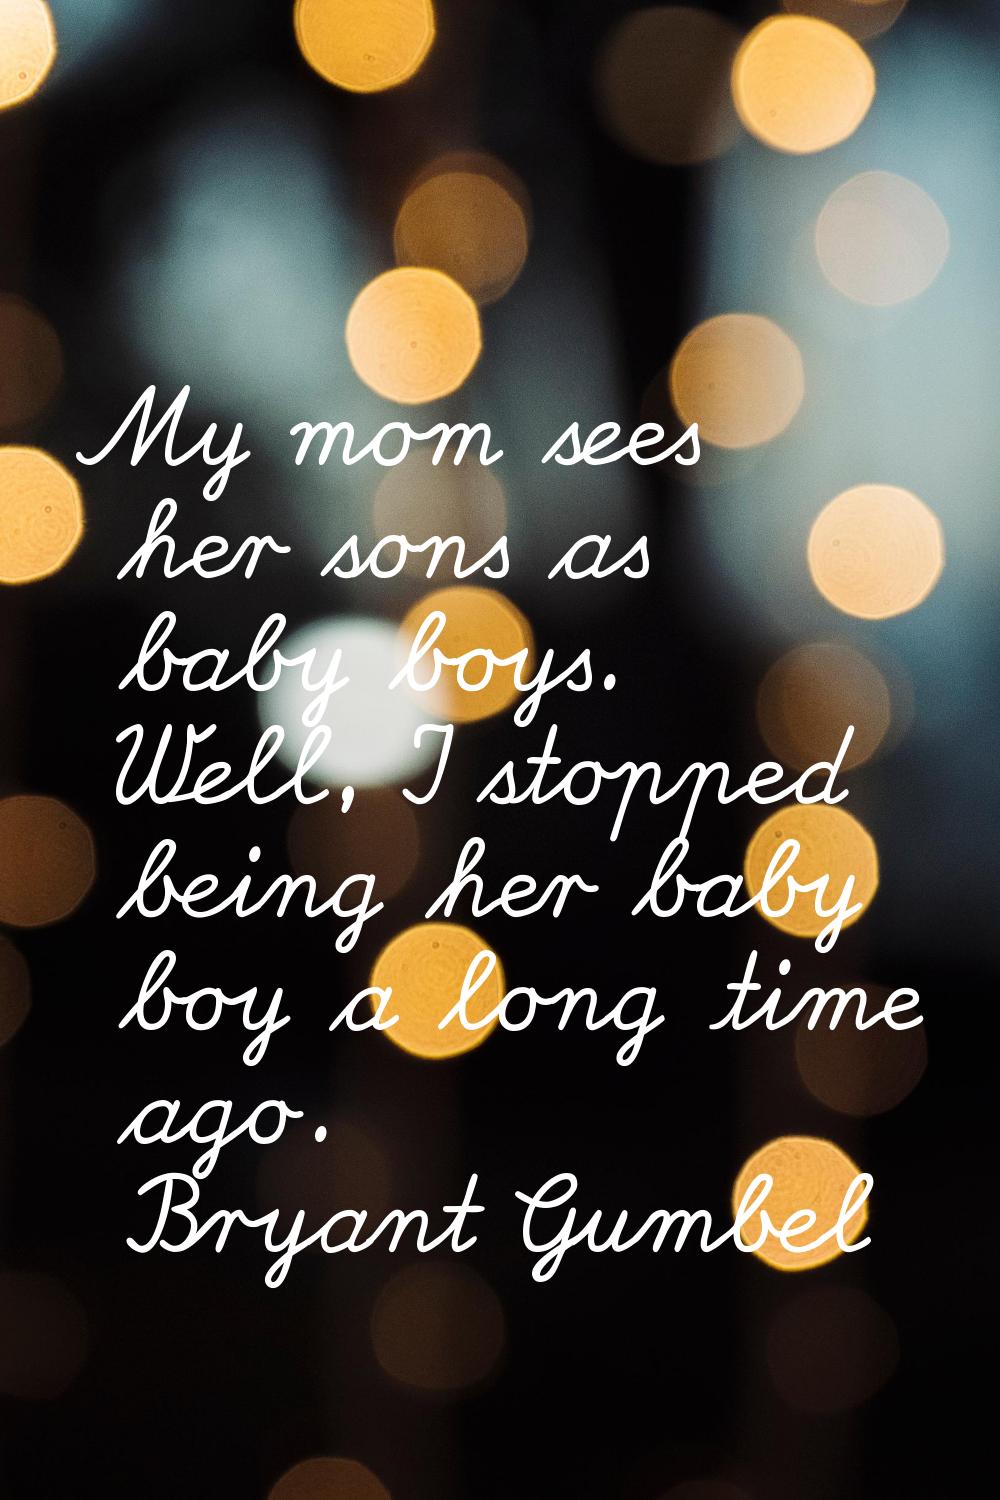 My mom sees her sons as baby boys. Well, I stopped being her baby boy a long time ago.